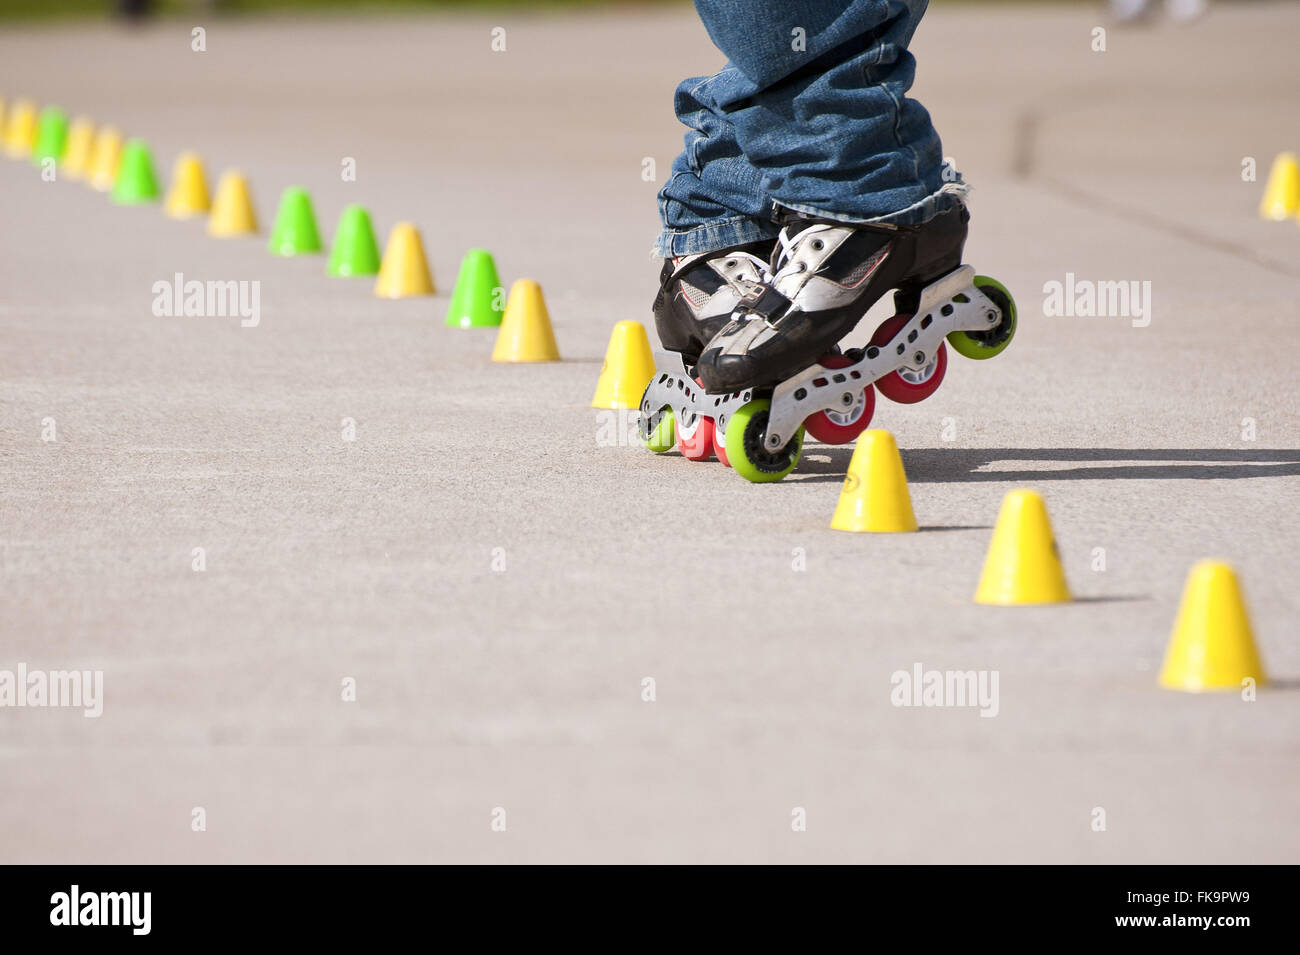 Skater dodging obstacles on the ground in park Stock Photo